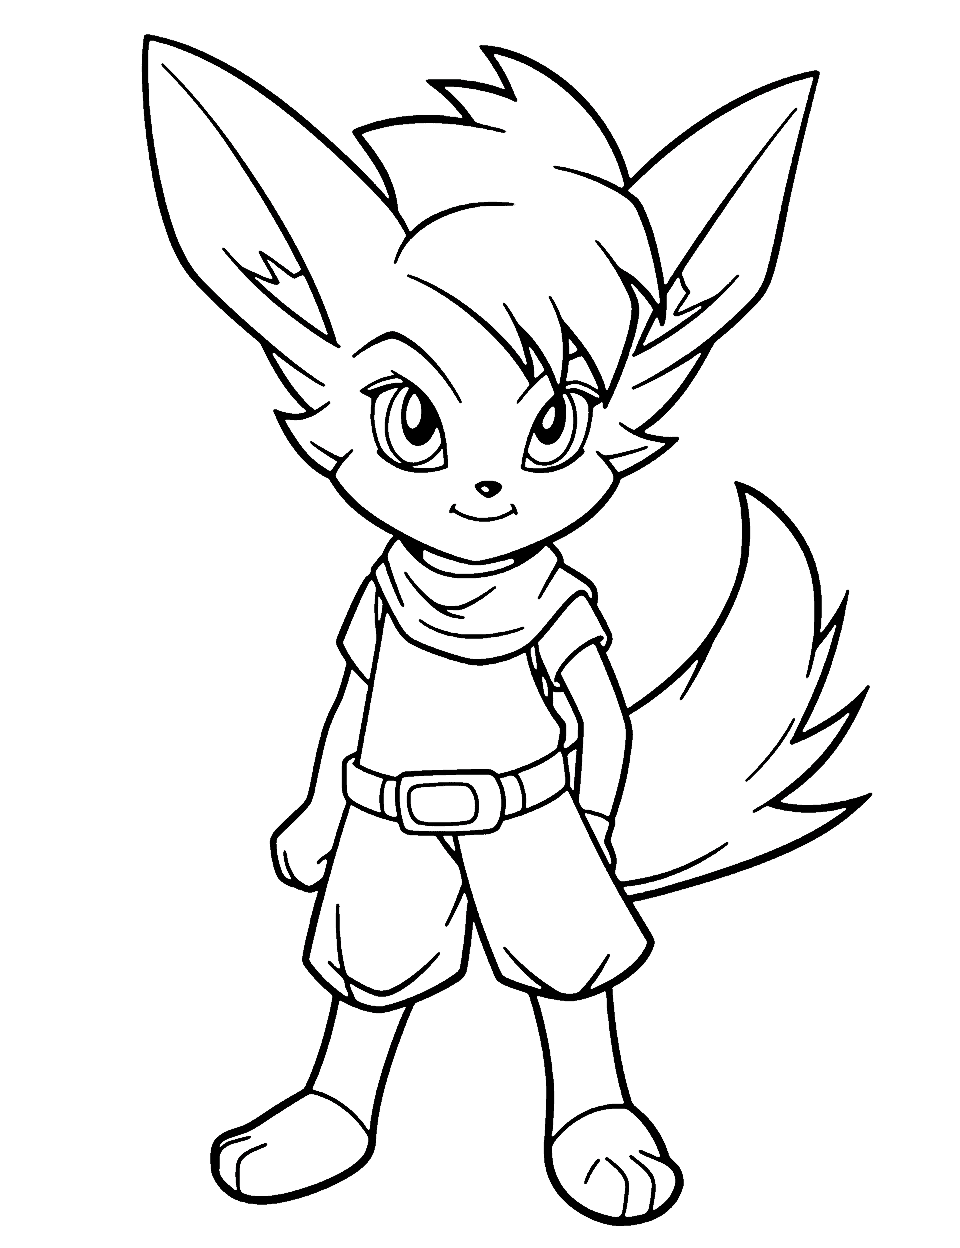 Cool Anime Fox Coloring Page - A cool anime fox with a sleek design, ready to embark on a mysterious adventure.